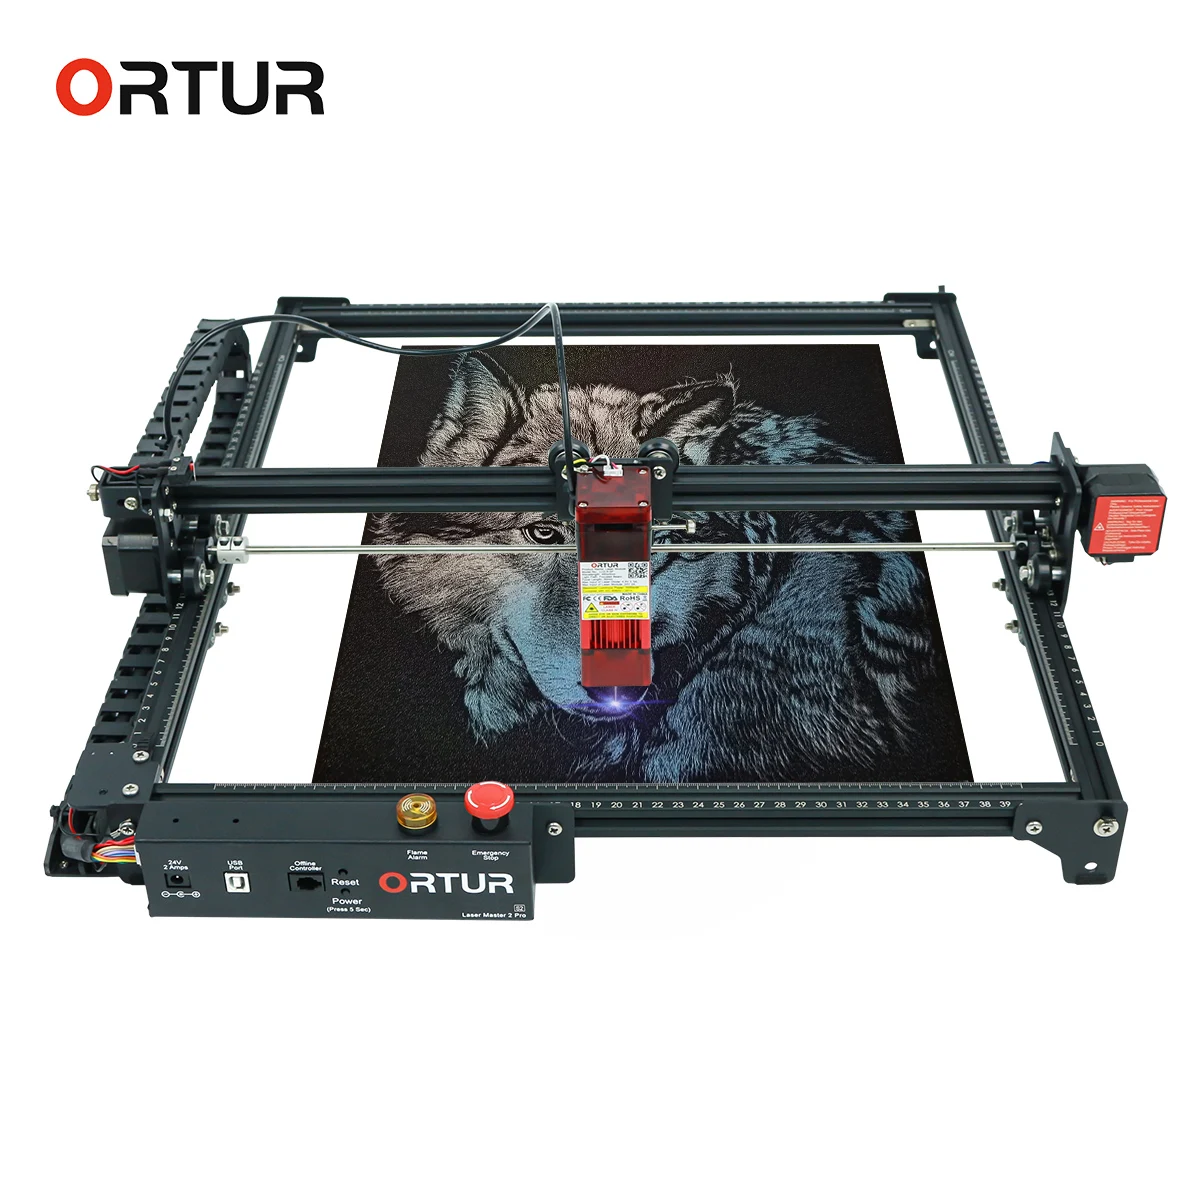 

Desktop CNC Router Ortur Laser Master High Security Laser Engraving and Cutting Machine Potable Engraver Easy Operation